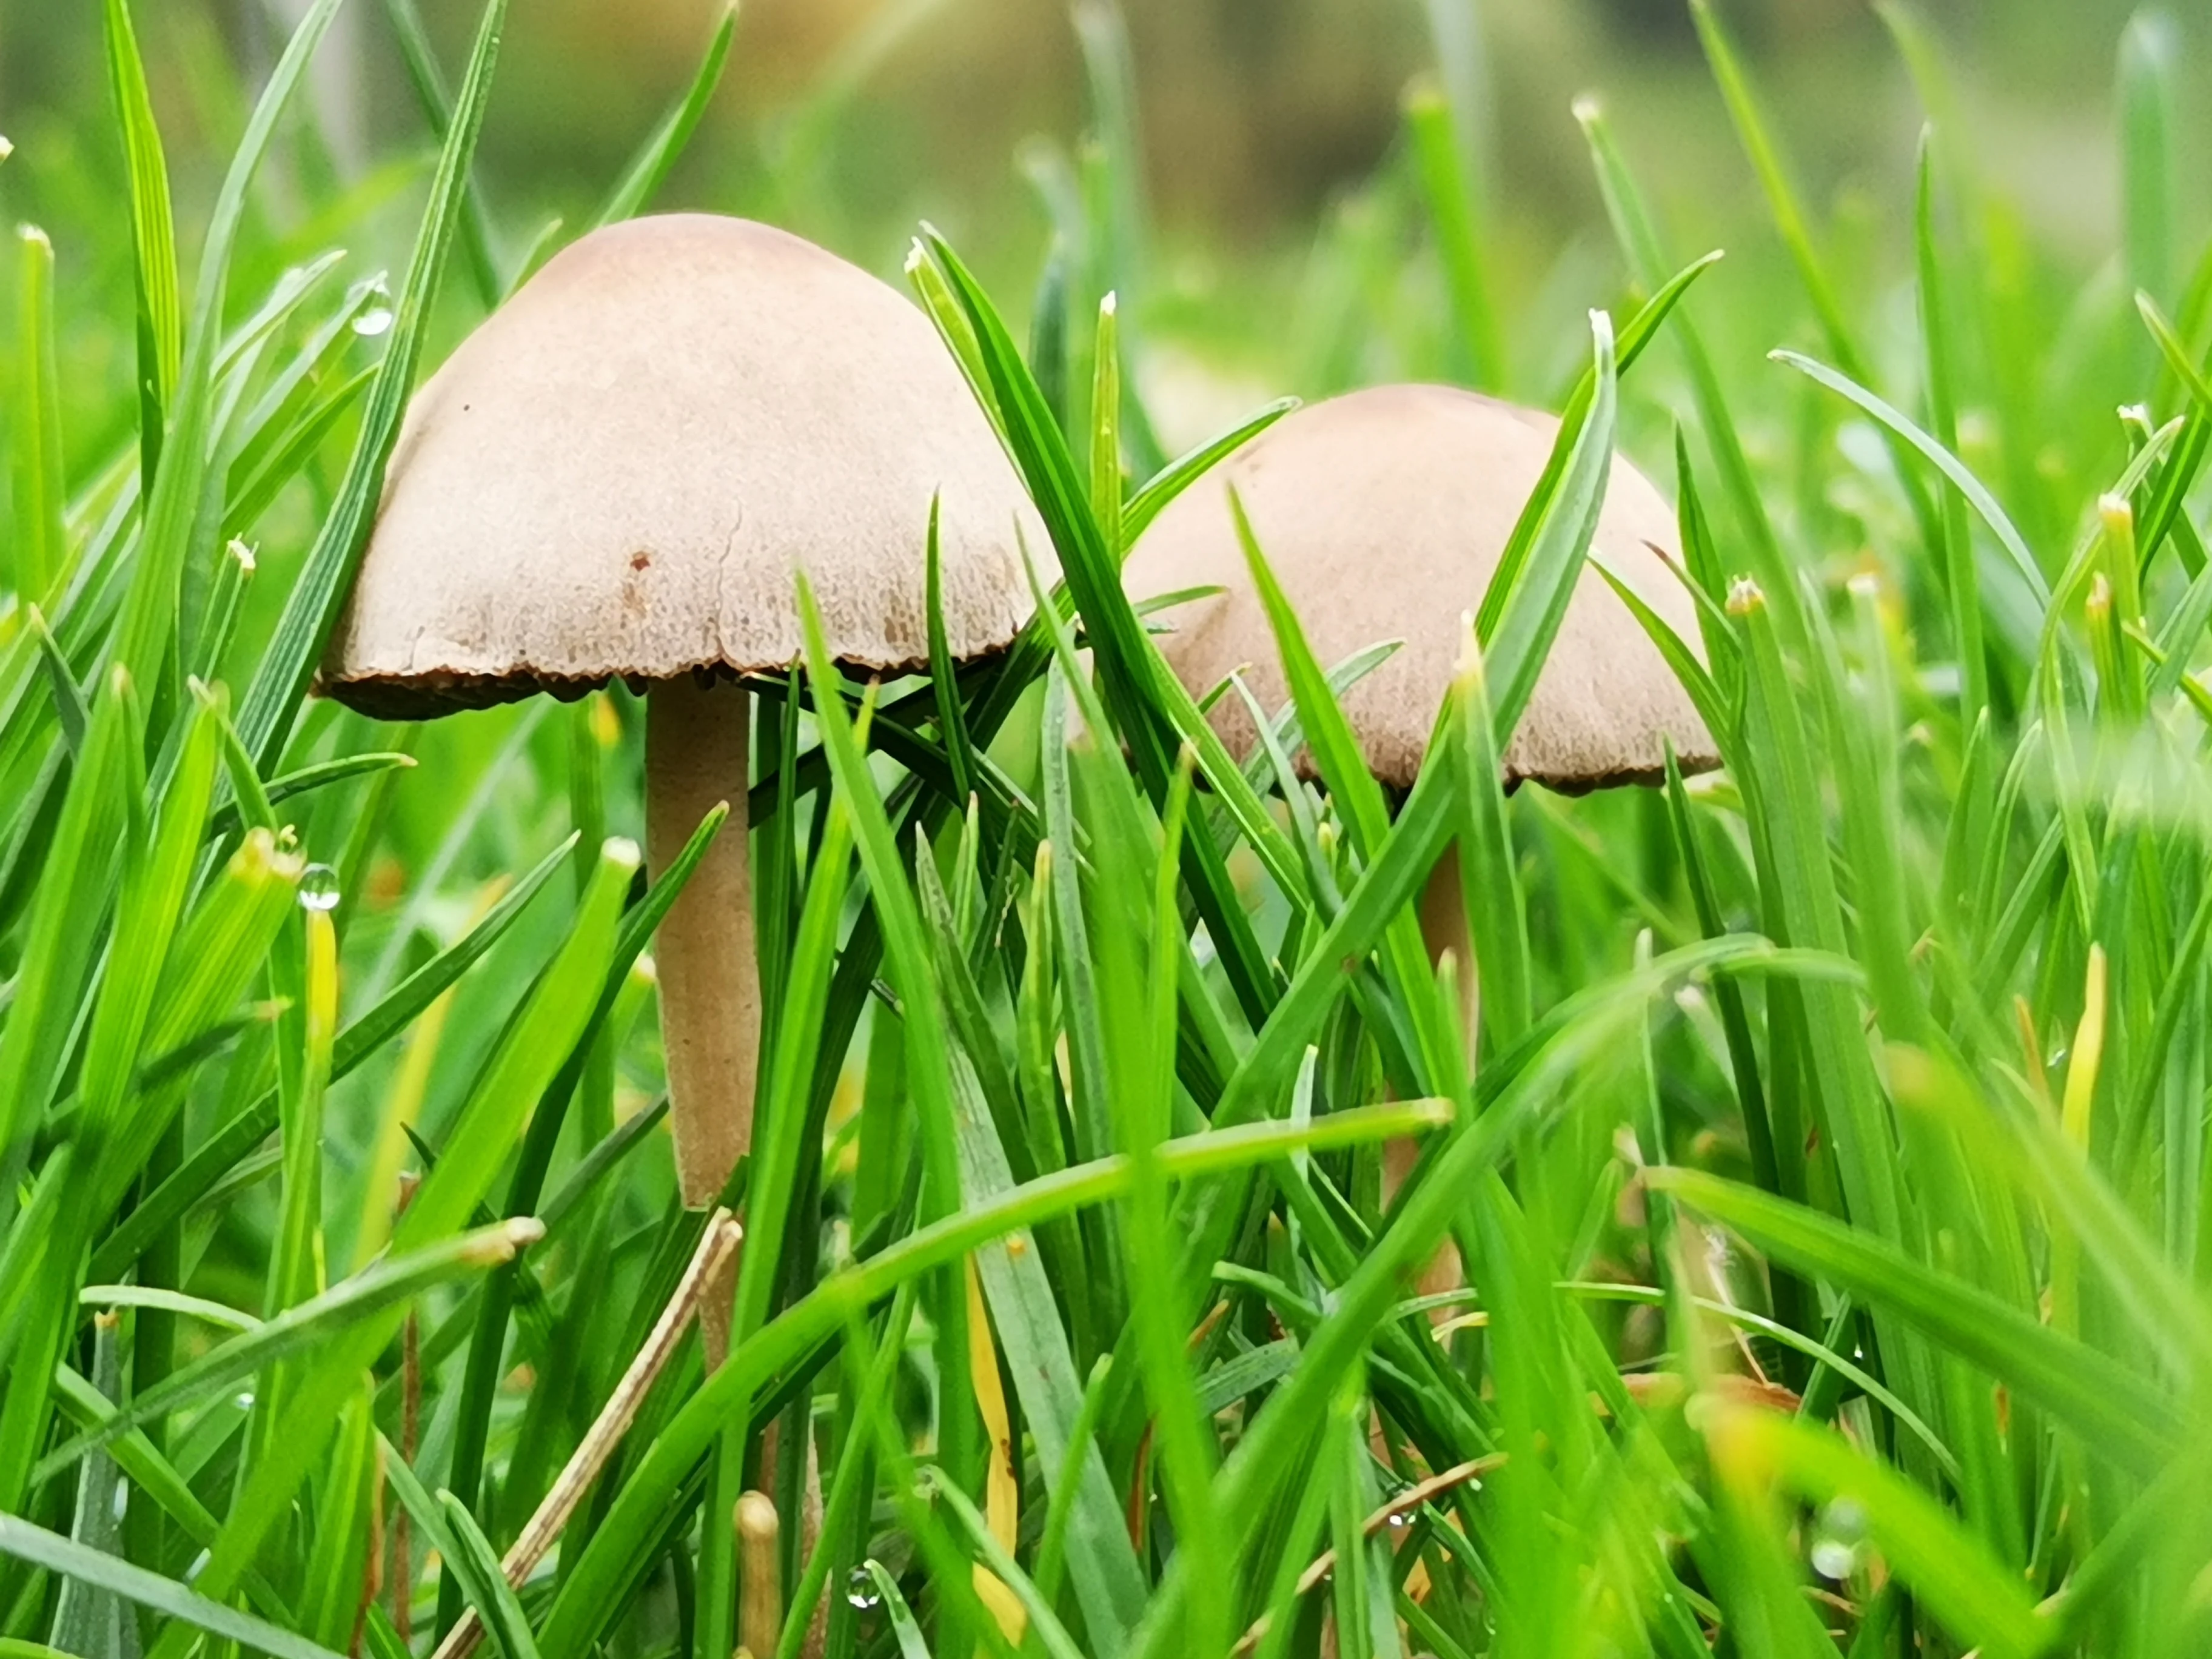 Mushrooms are taking over lawns in eastern Canada - an expert explains why